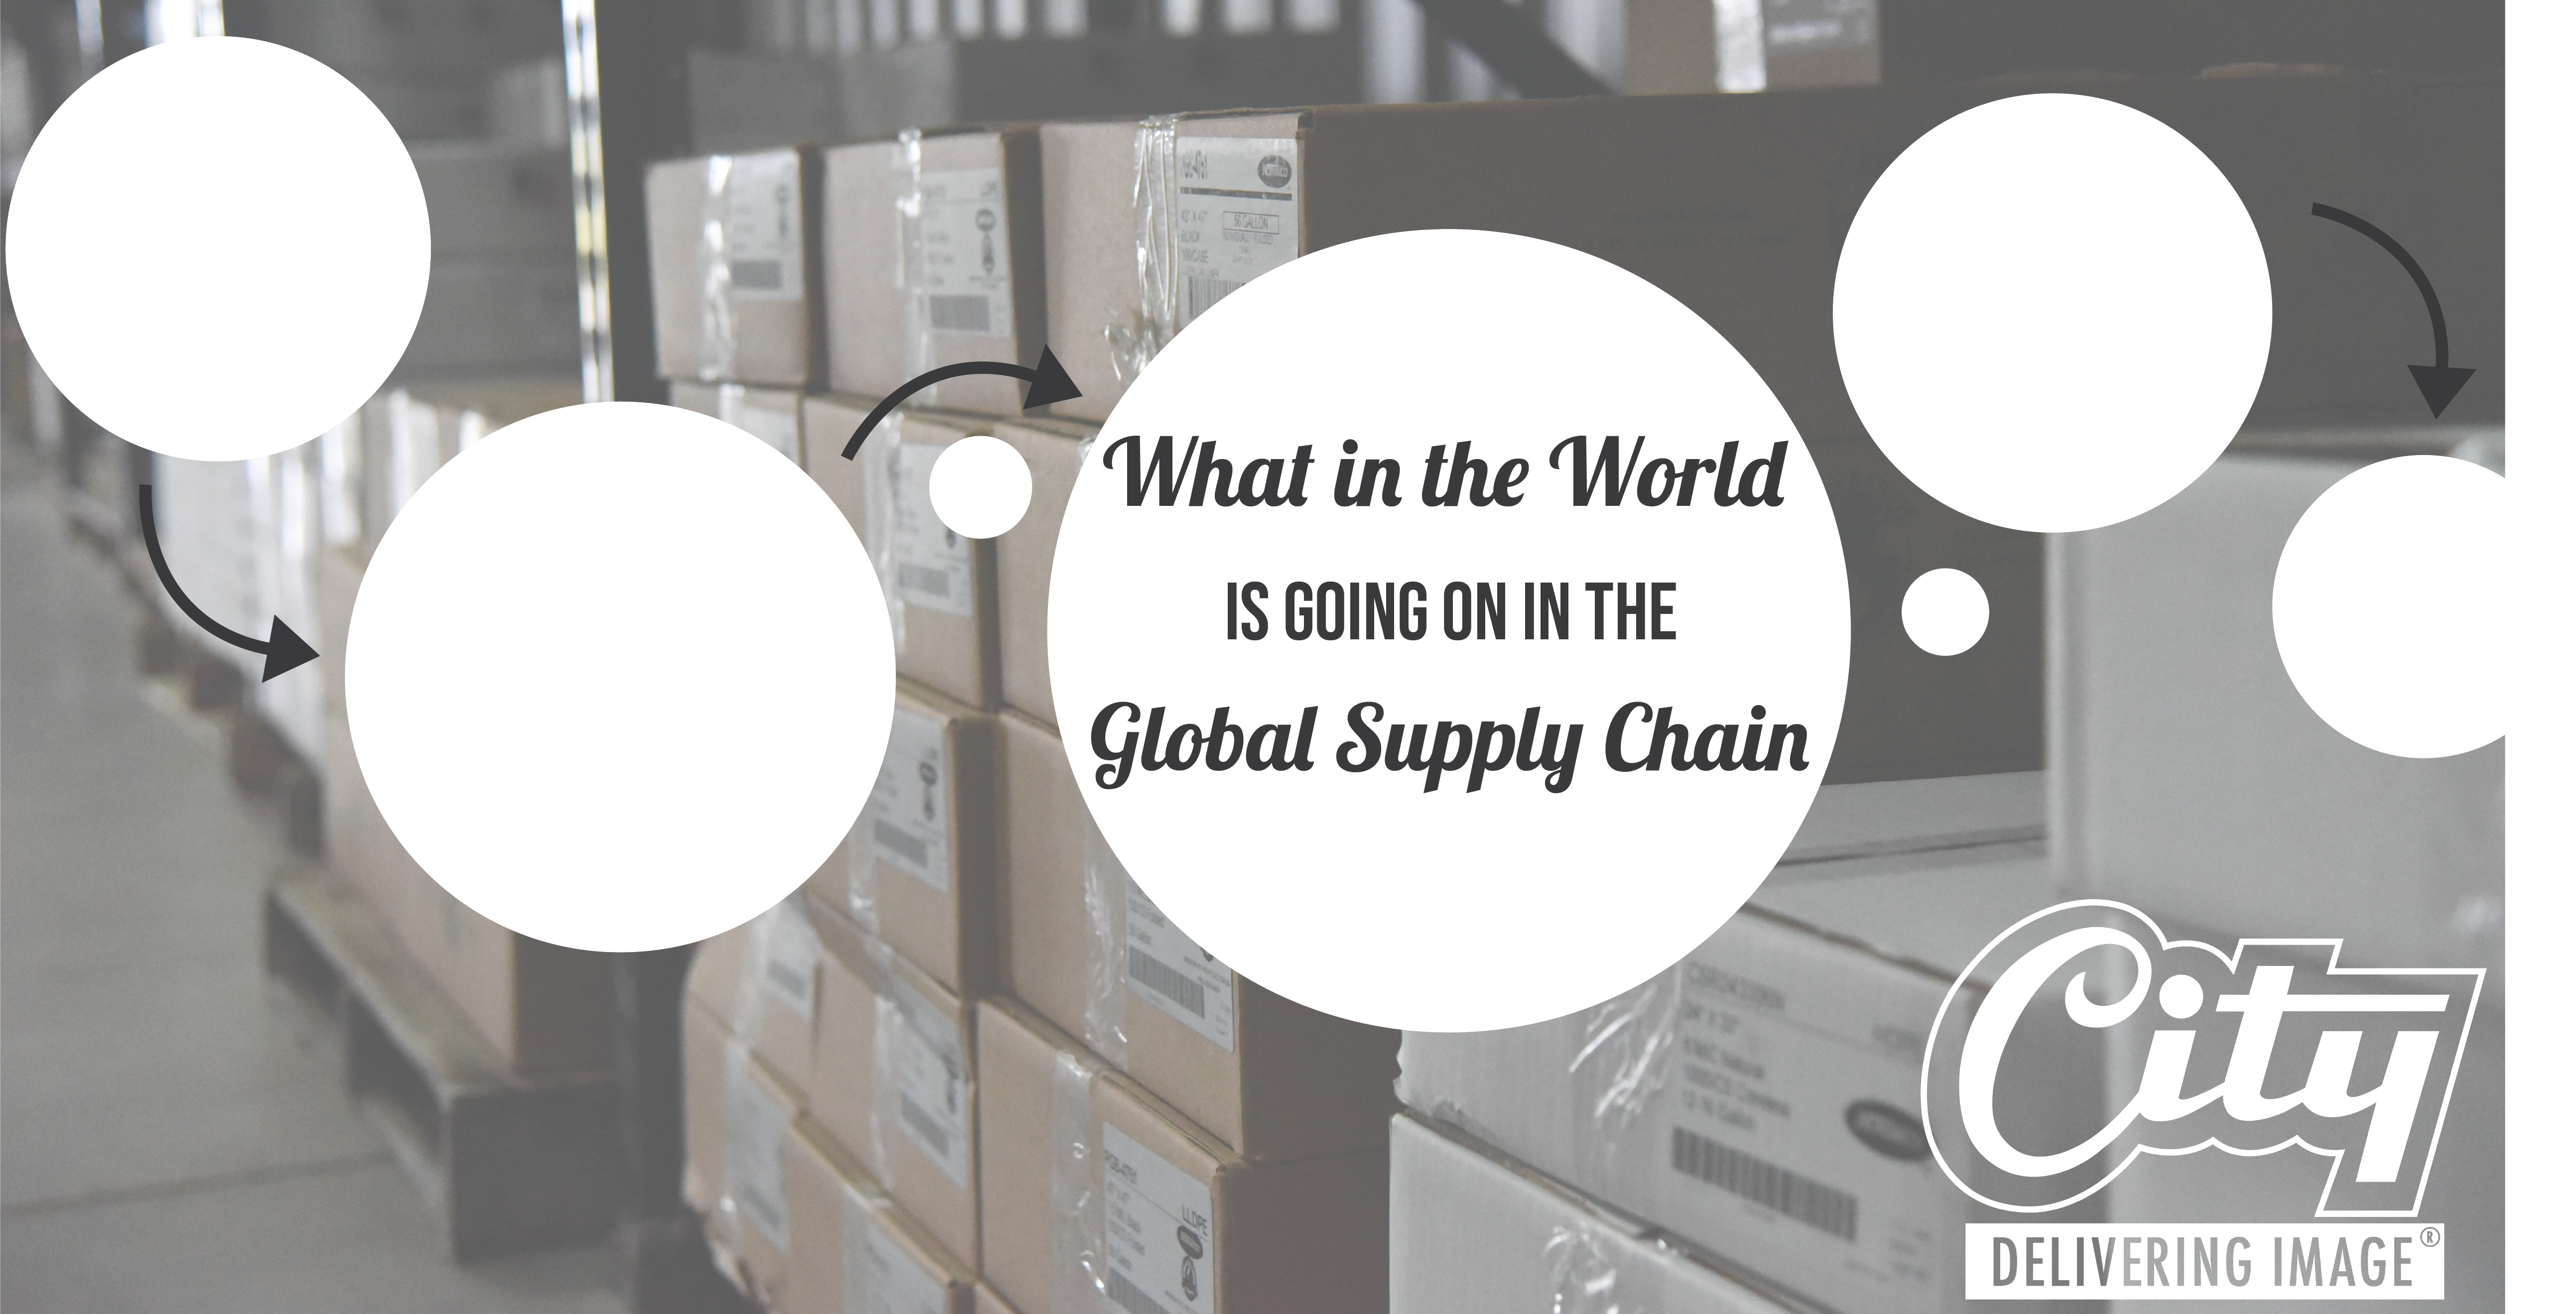 What is going on in the supply chain